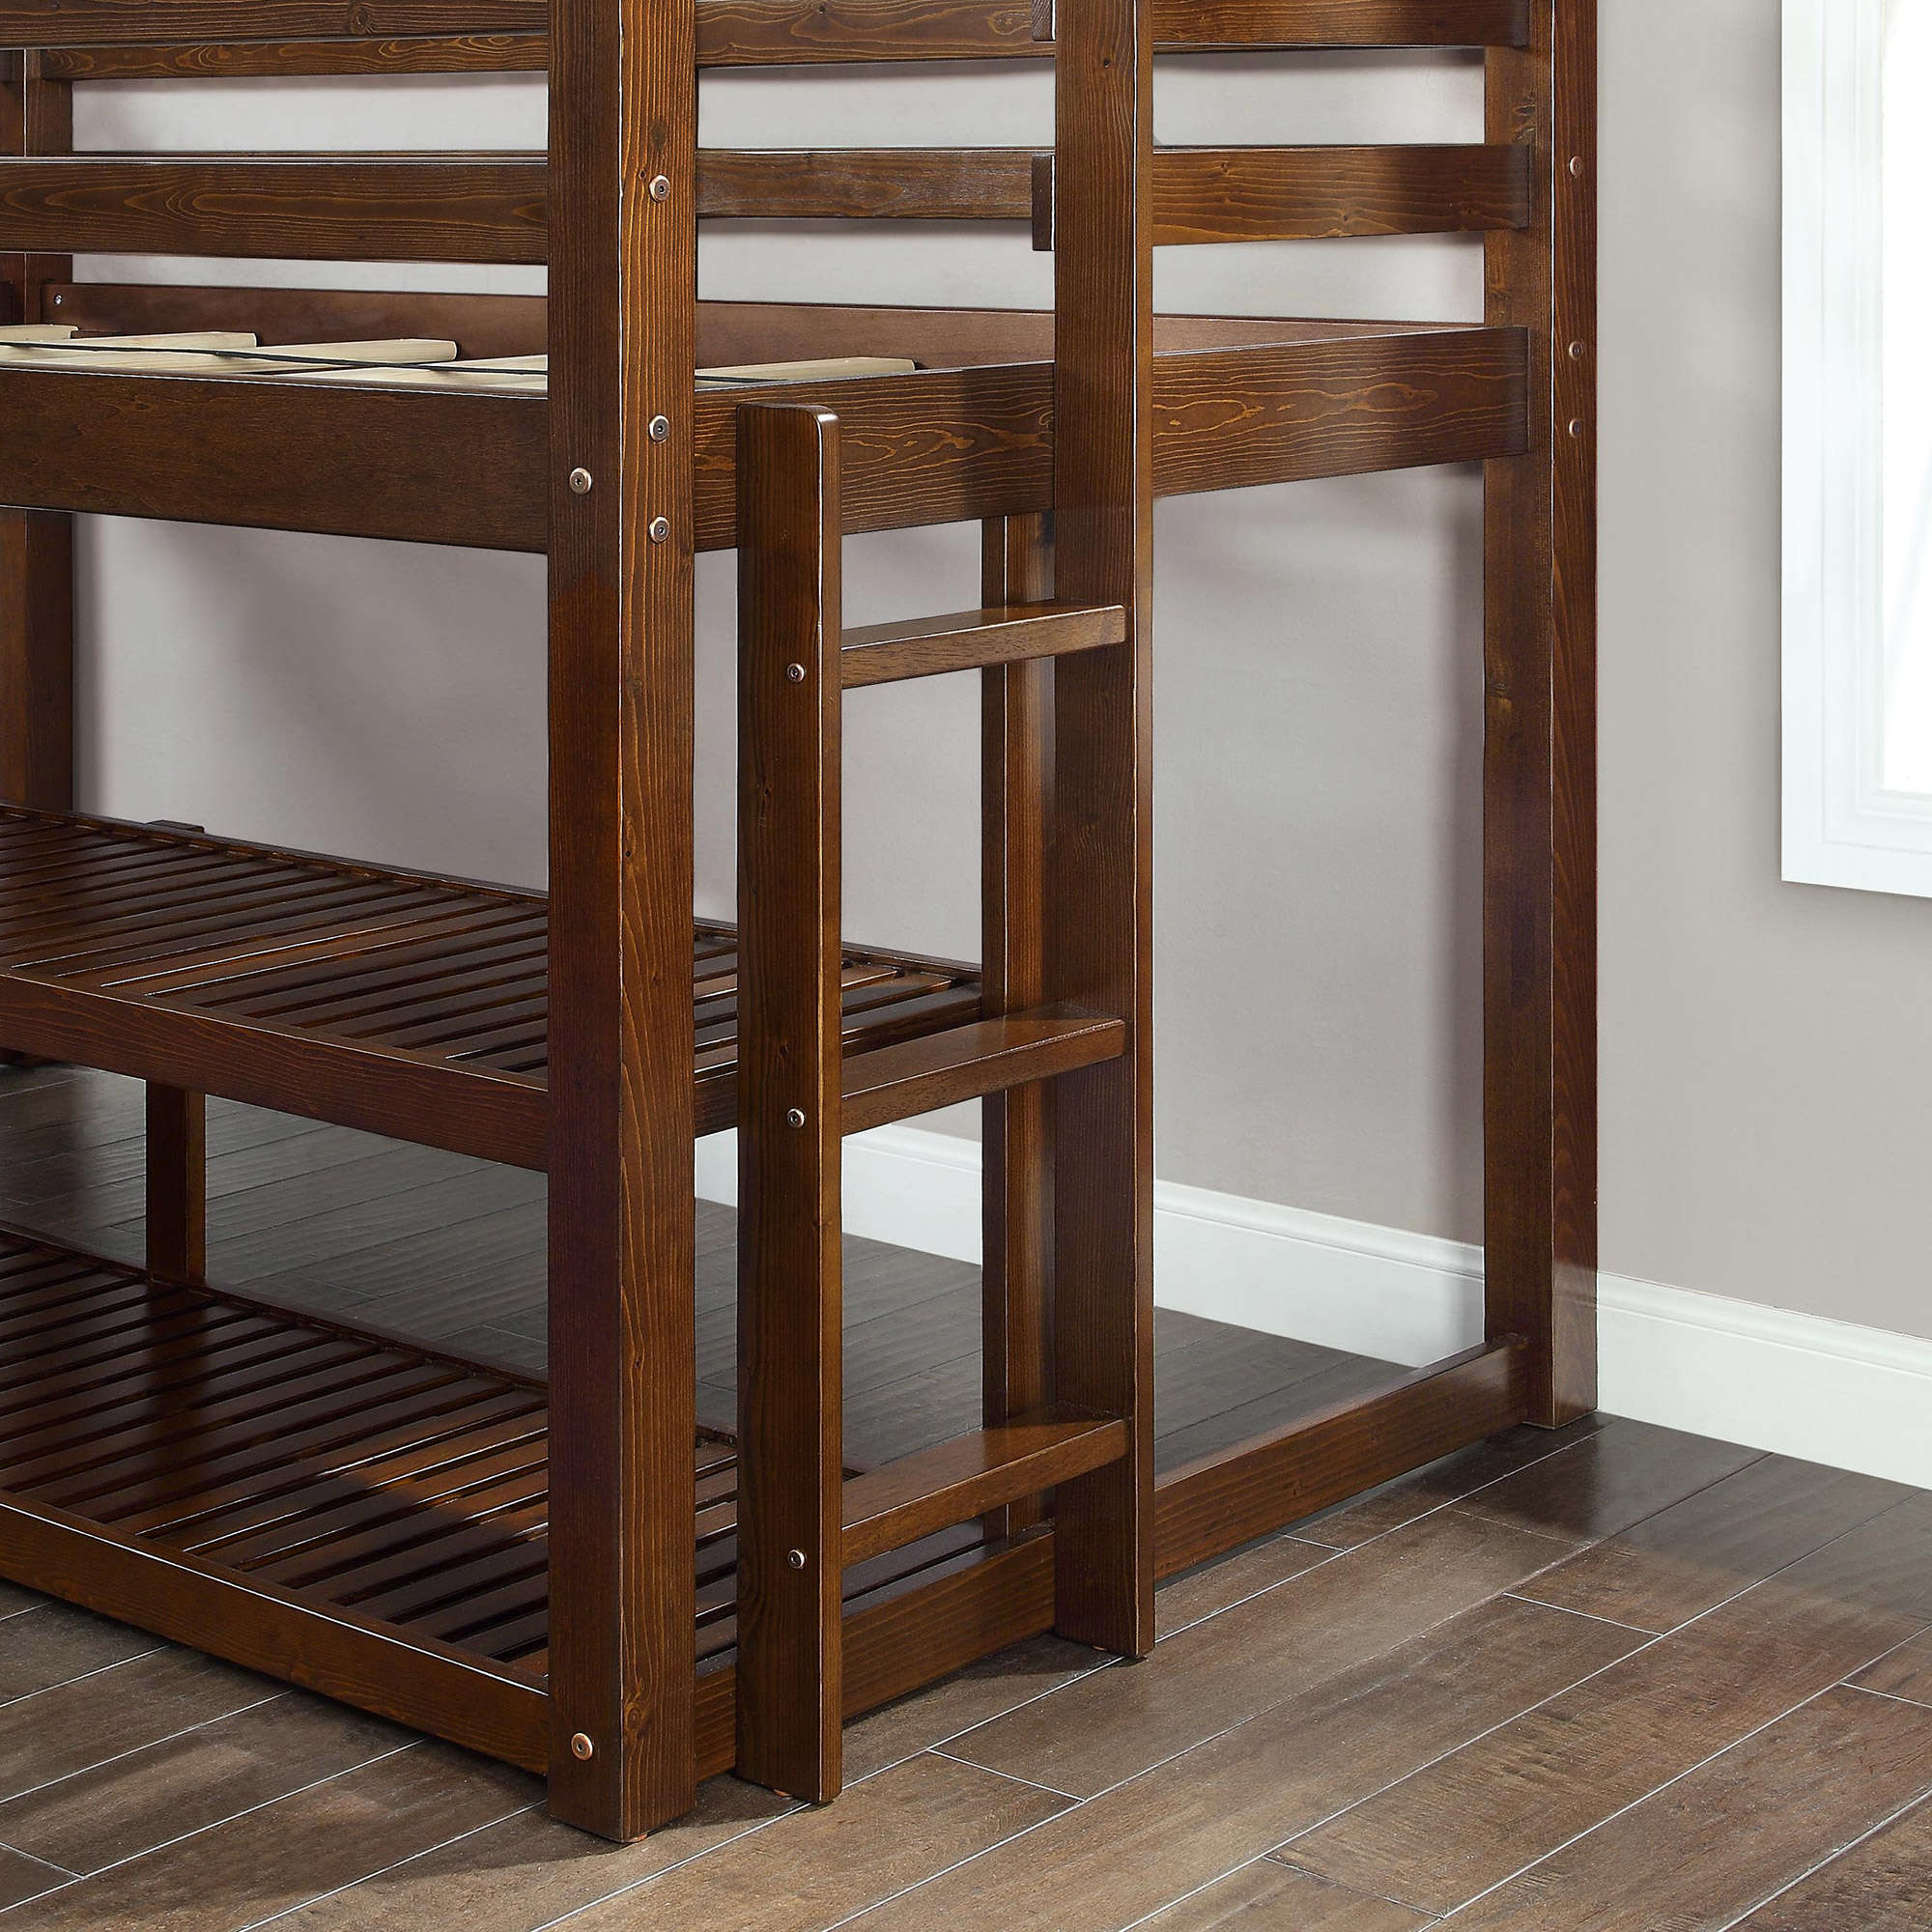 Better Homes and Gardens Greer Twin Loft Storage Bed, Espresso - image 4 of 4